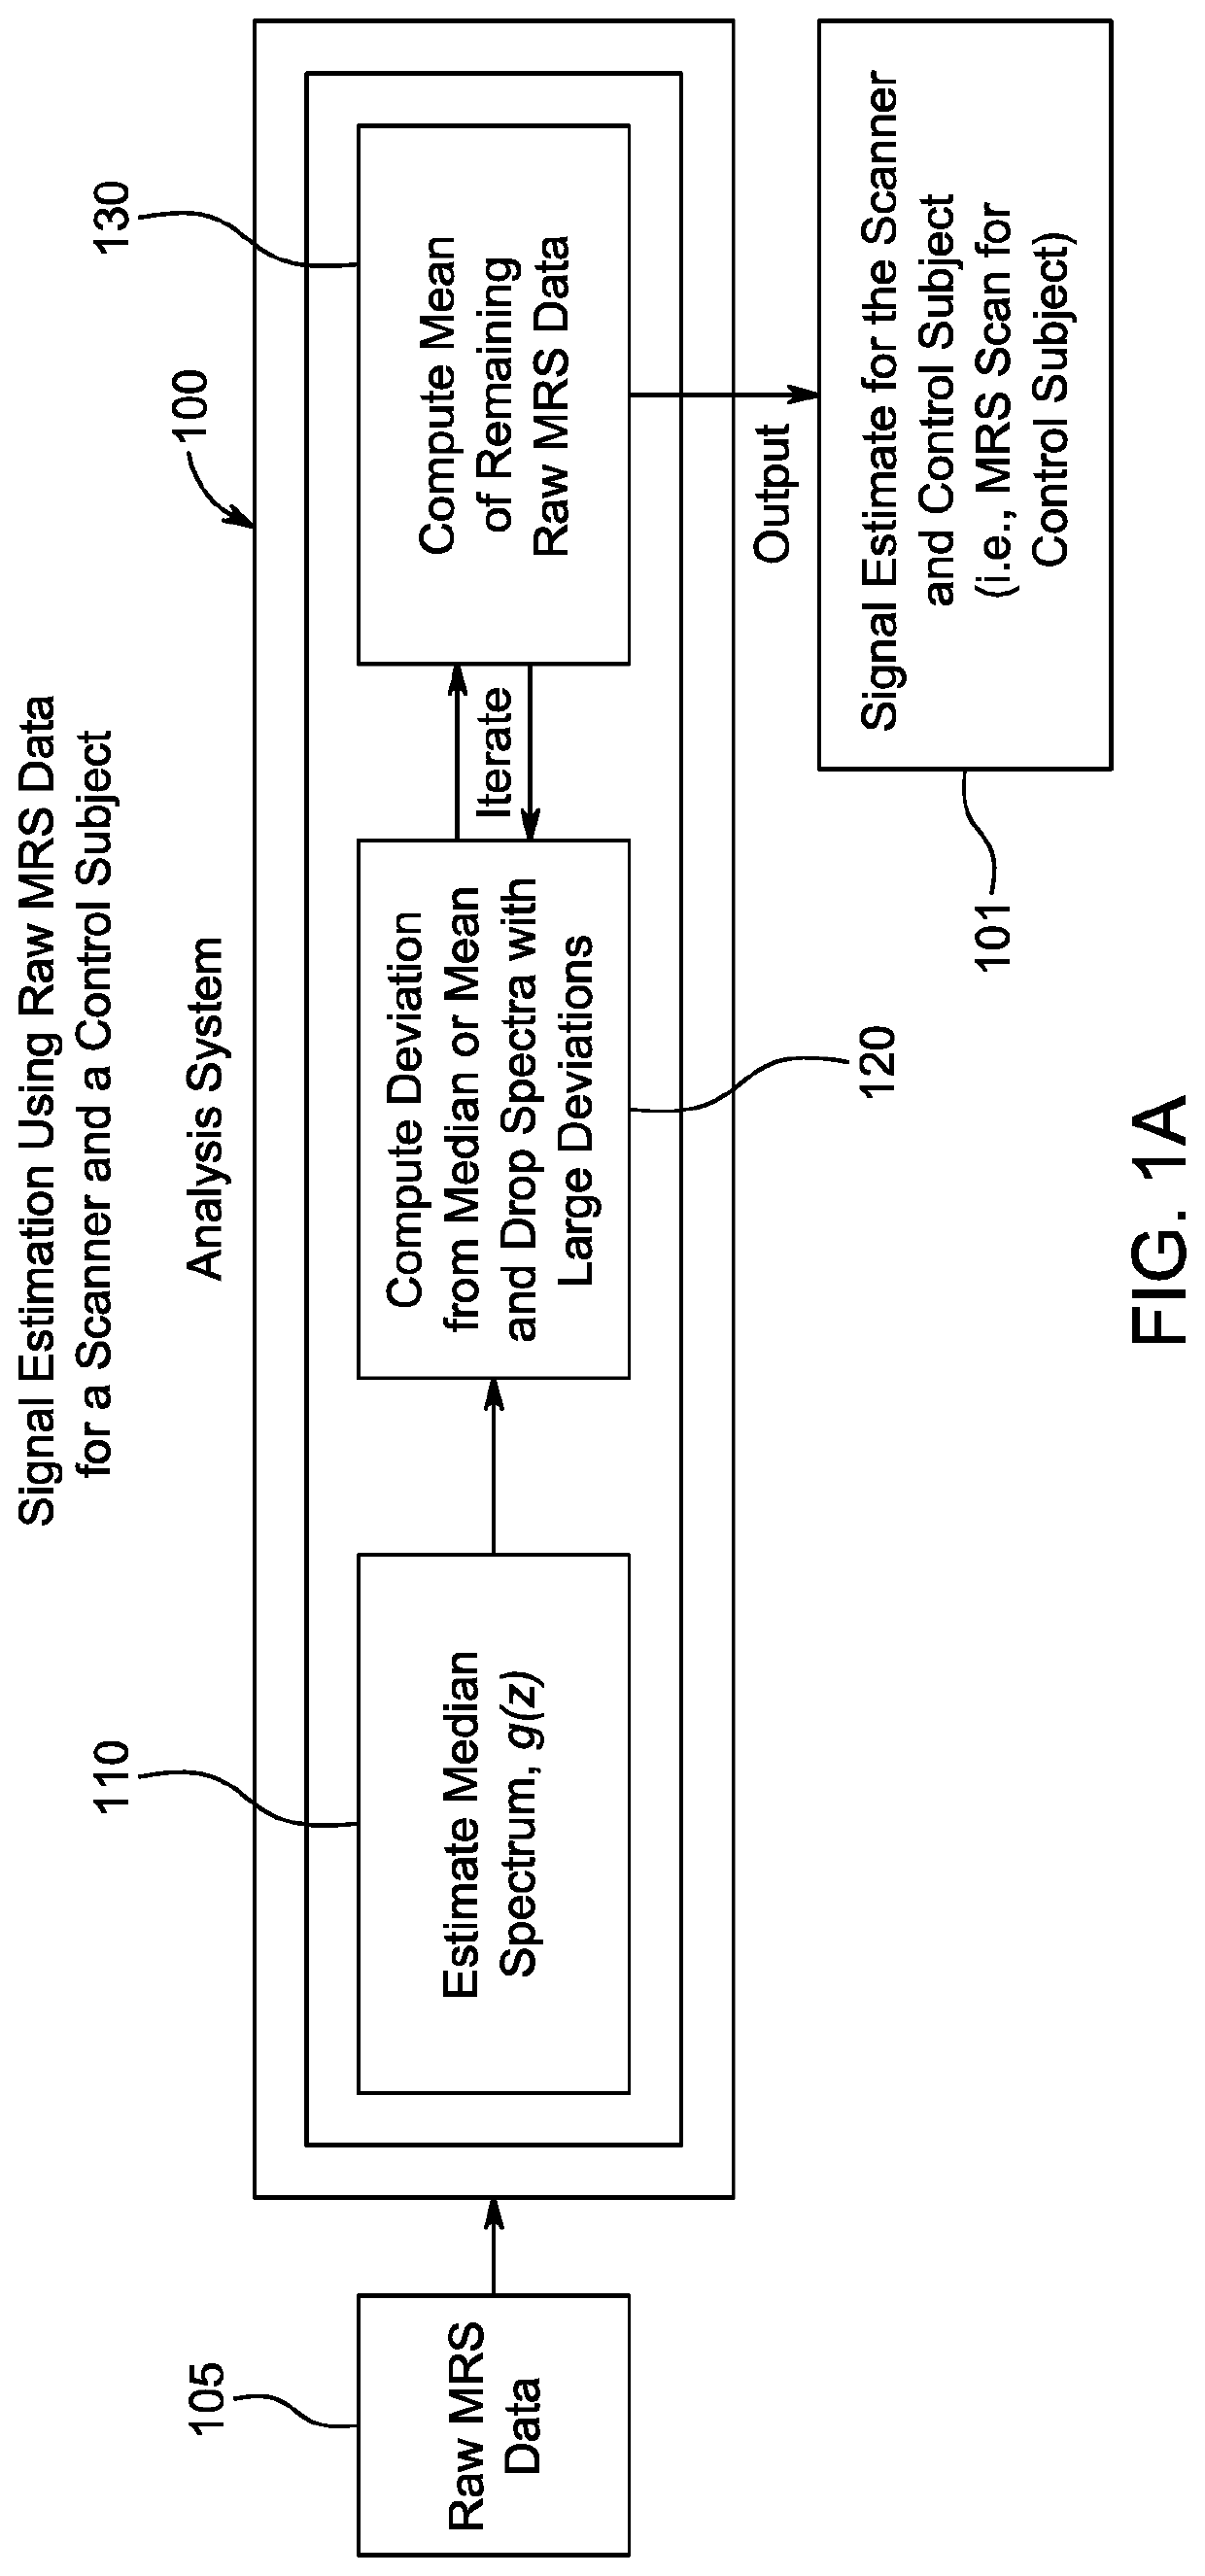 Method and procedure for signal estimation and data harmonization for magnetic resonance spectroscopy (MRS)